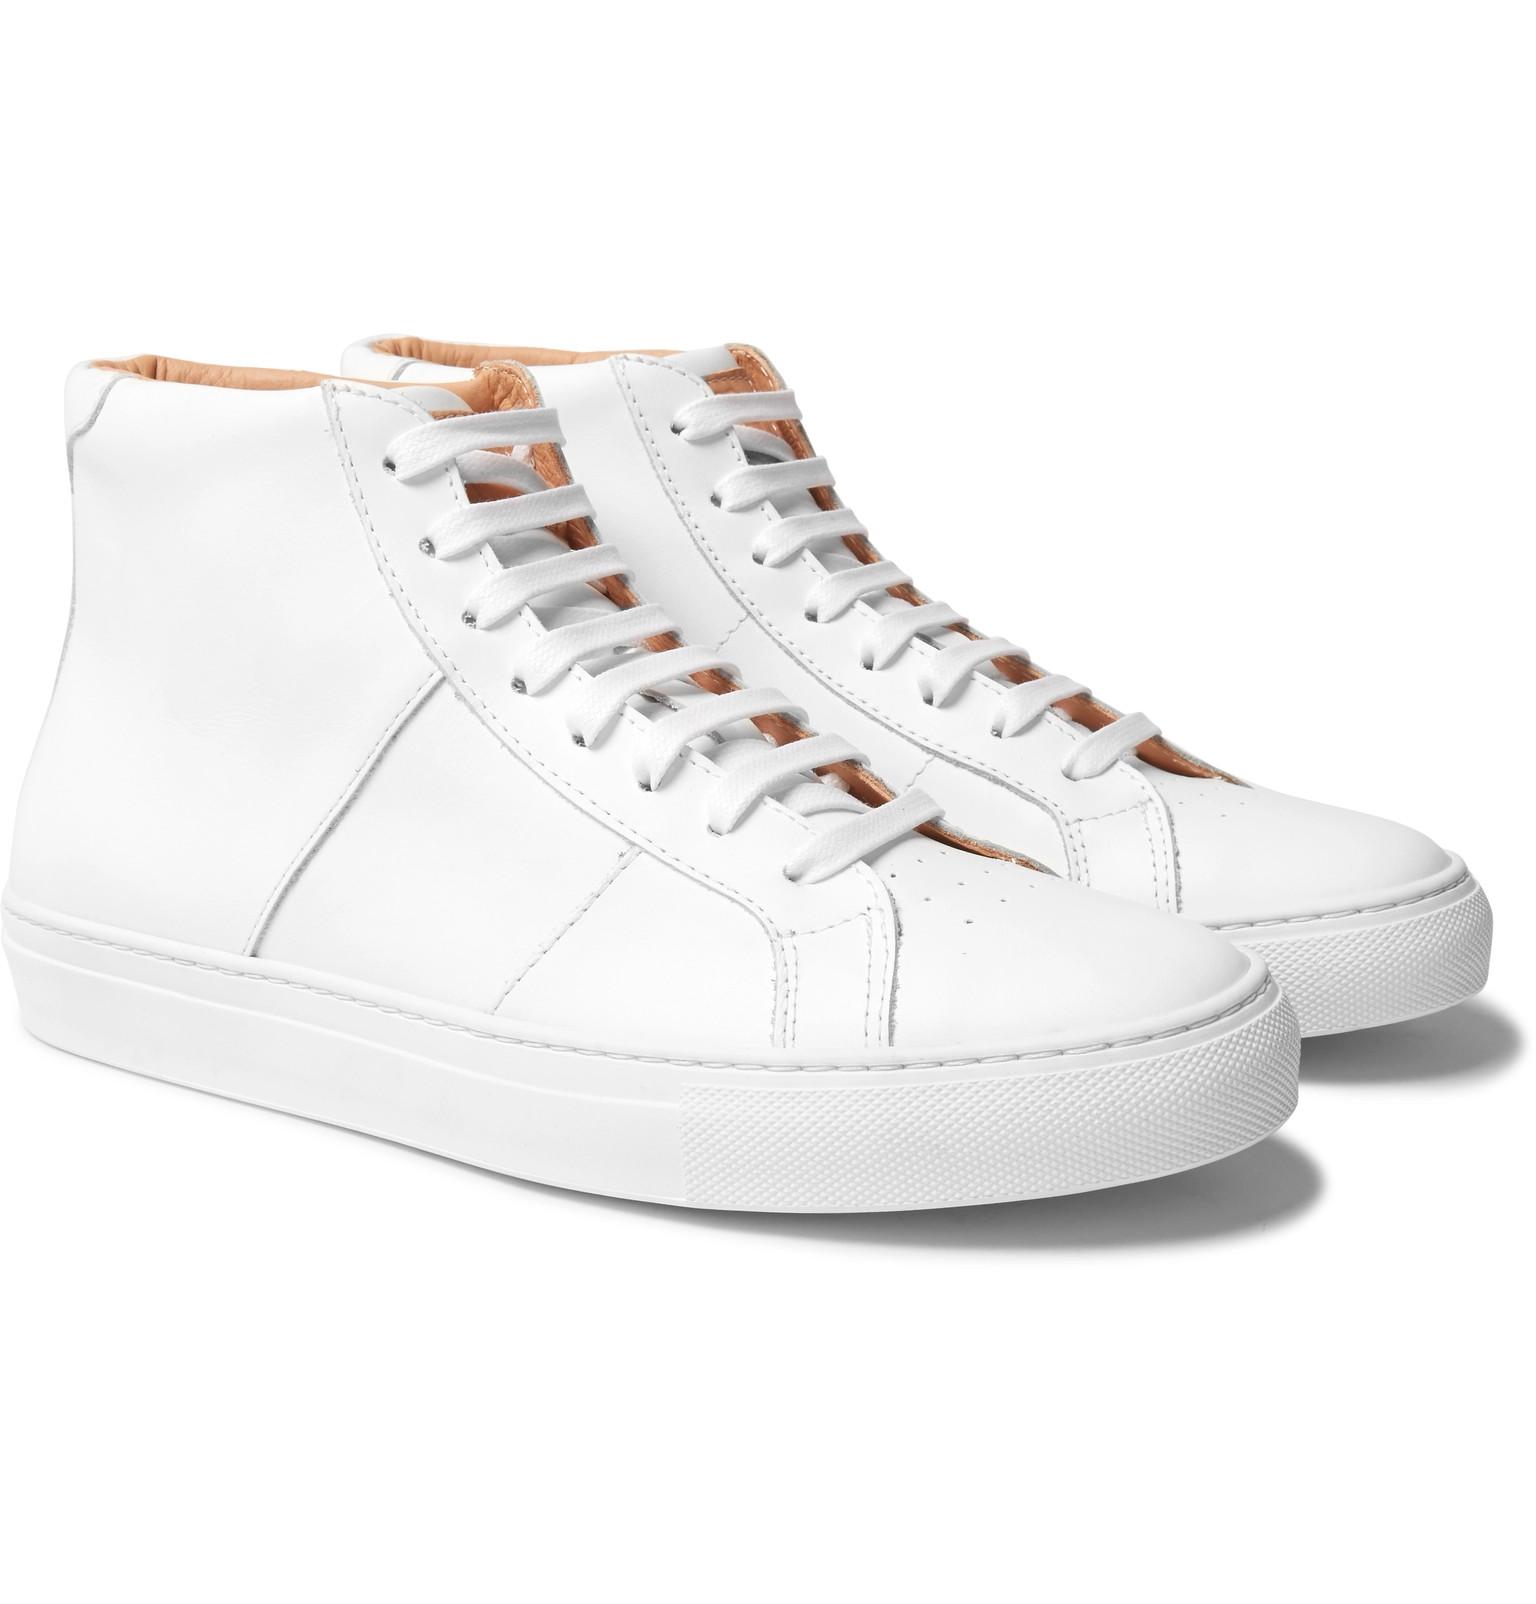 GREATS The Royale Leather High-top Sneakers in White for Men - Lyst